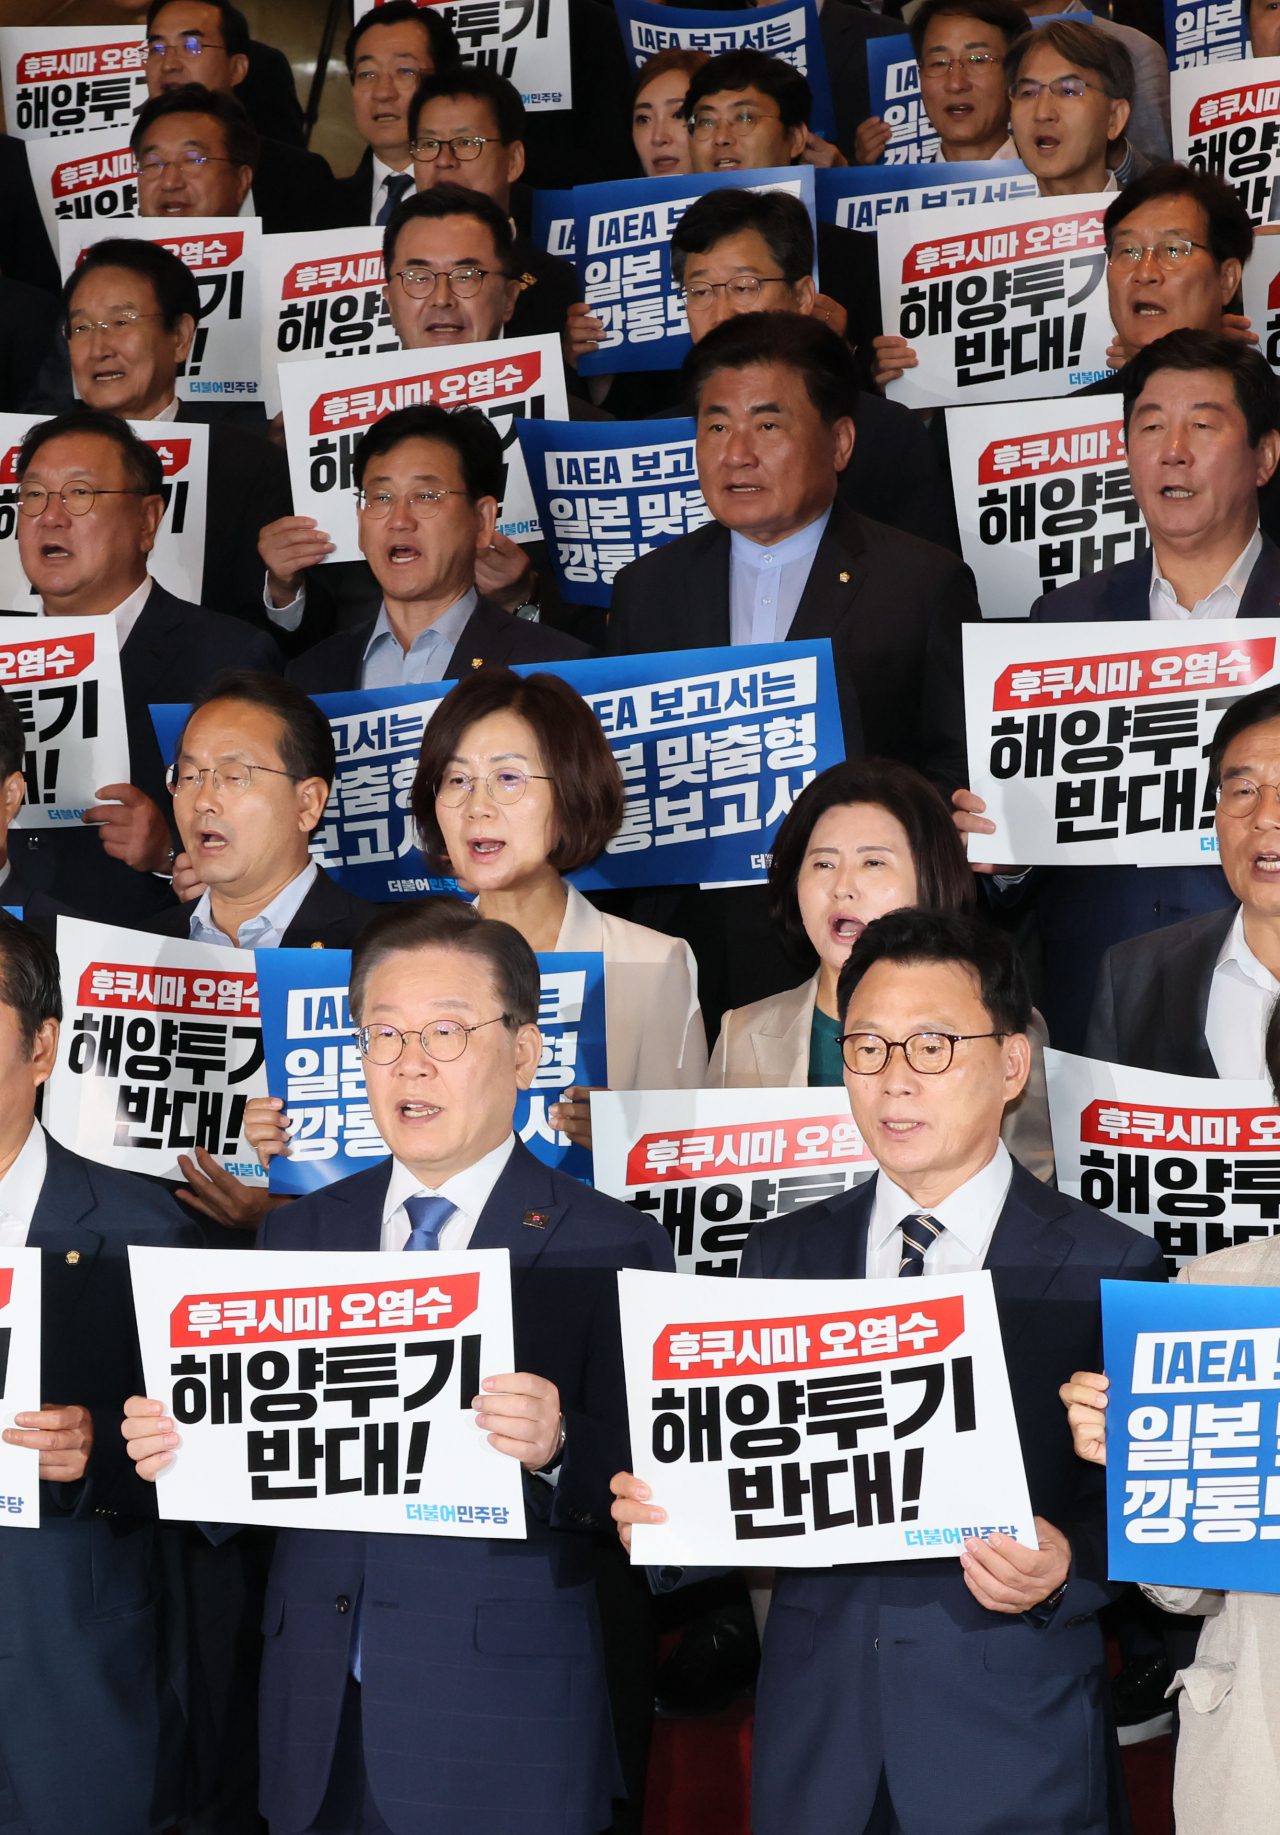 Lee Jae-myung (2nd from left, 1st row), leader of the main opposition Democratic Party, and other party lawmakers chant slogans during a rally at the National Assembly in Seoul on Wednesday, to voice their objection to Japan's planned discharge of treated radioactive water from the crippled nuclear reactors in Fukushima into the ocean. The rally came one day after the International Atomic Energy Agency presented its conclusion that the Japanese plan is consistent with its safety standards. (Yonhap)